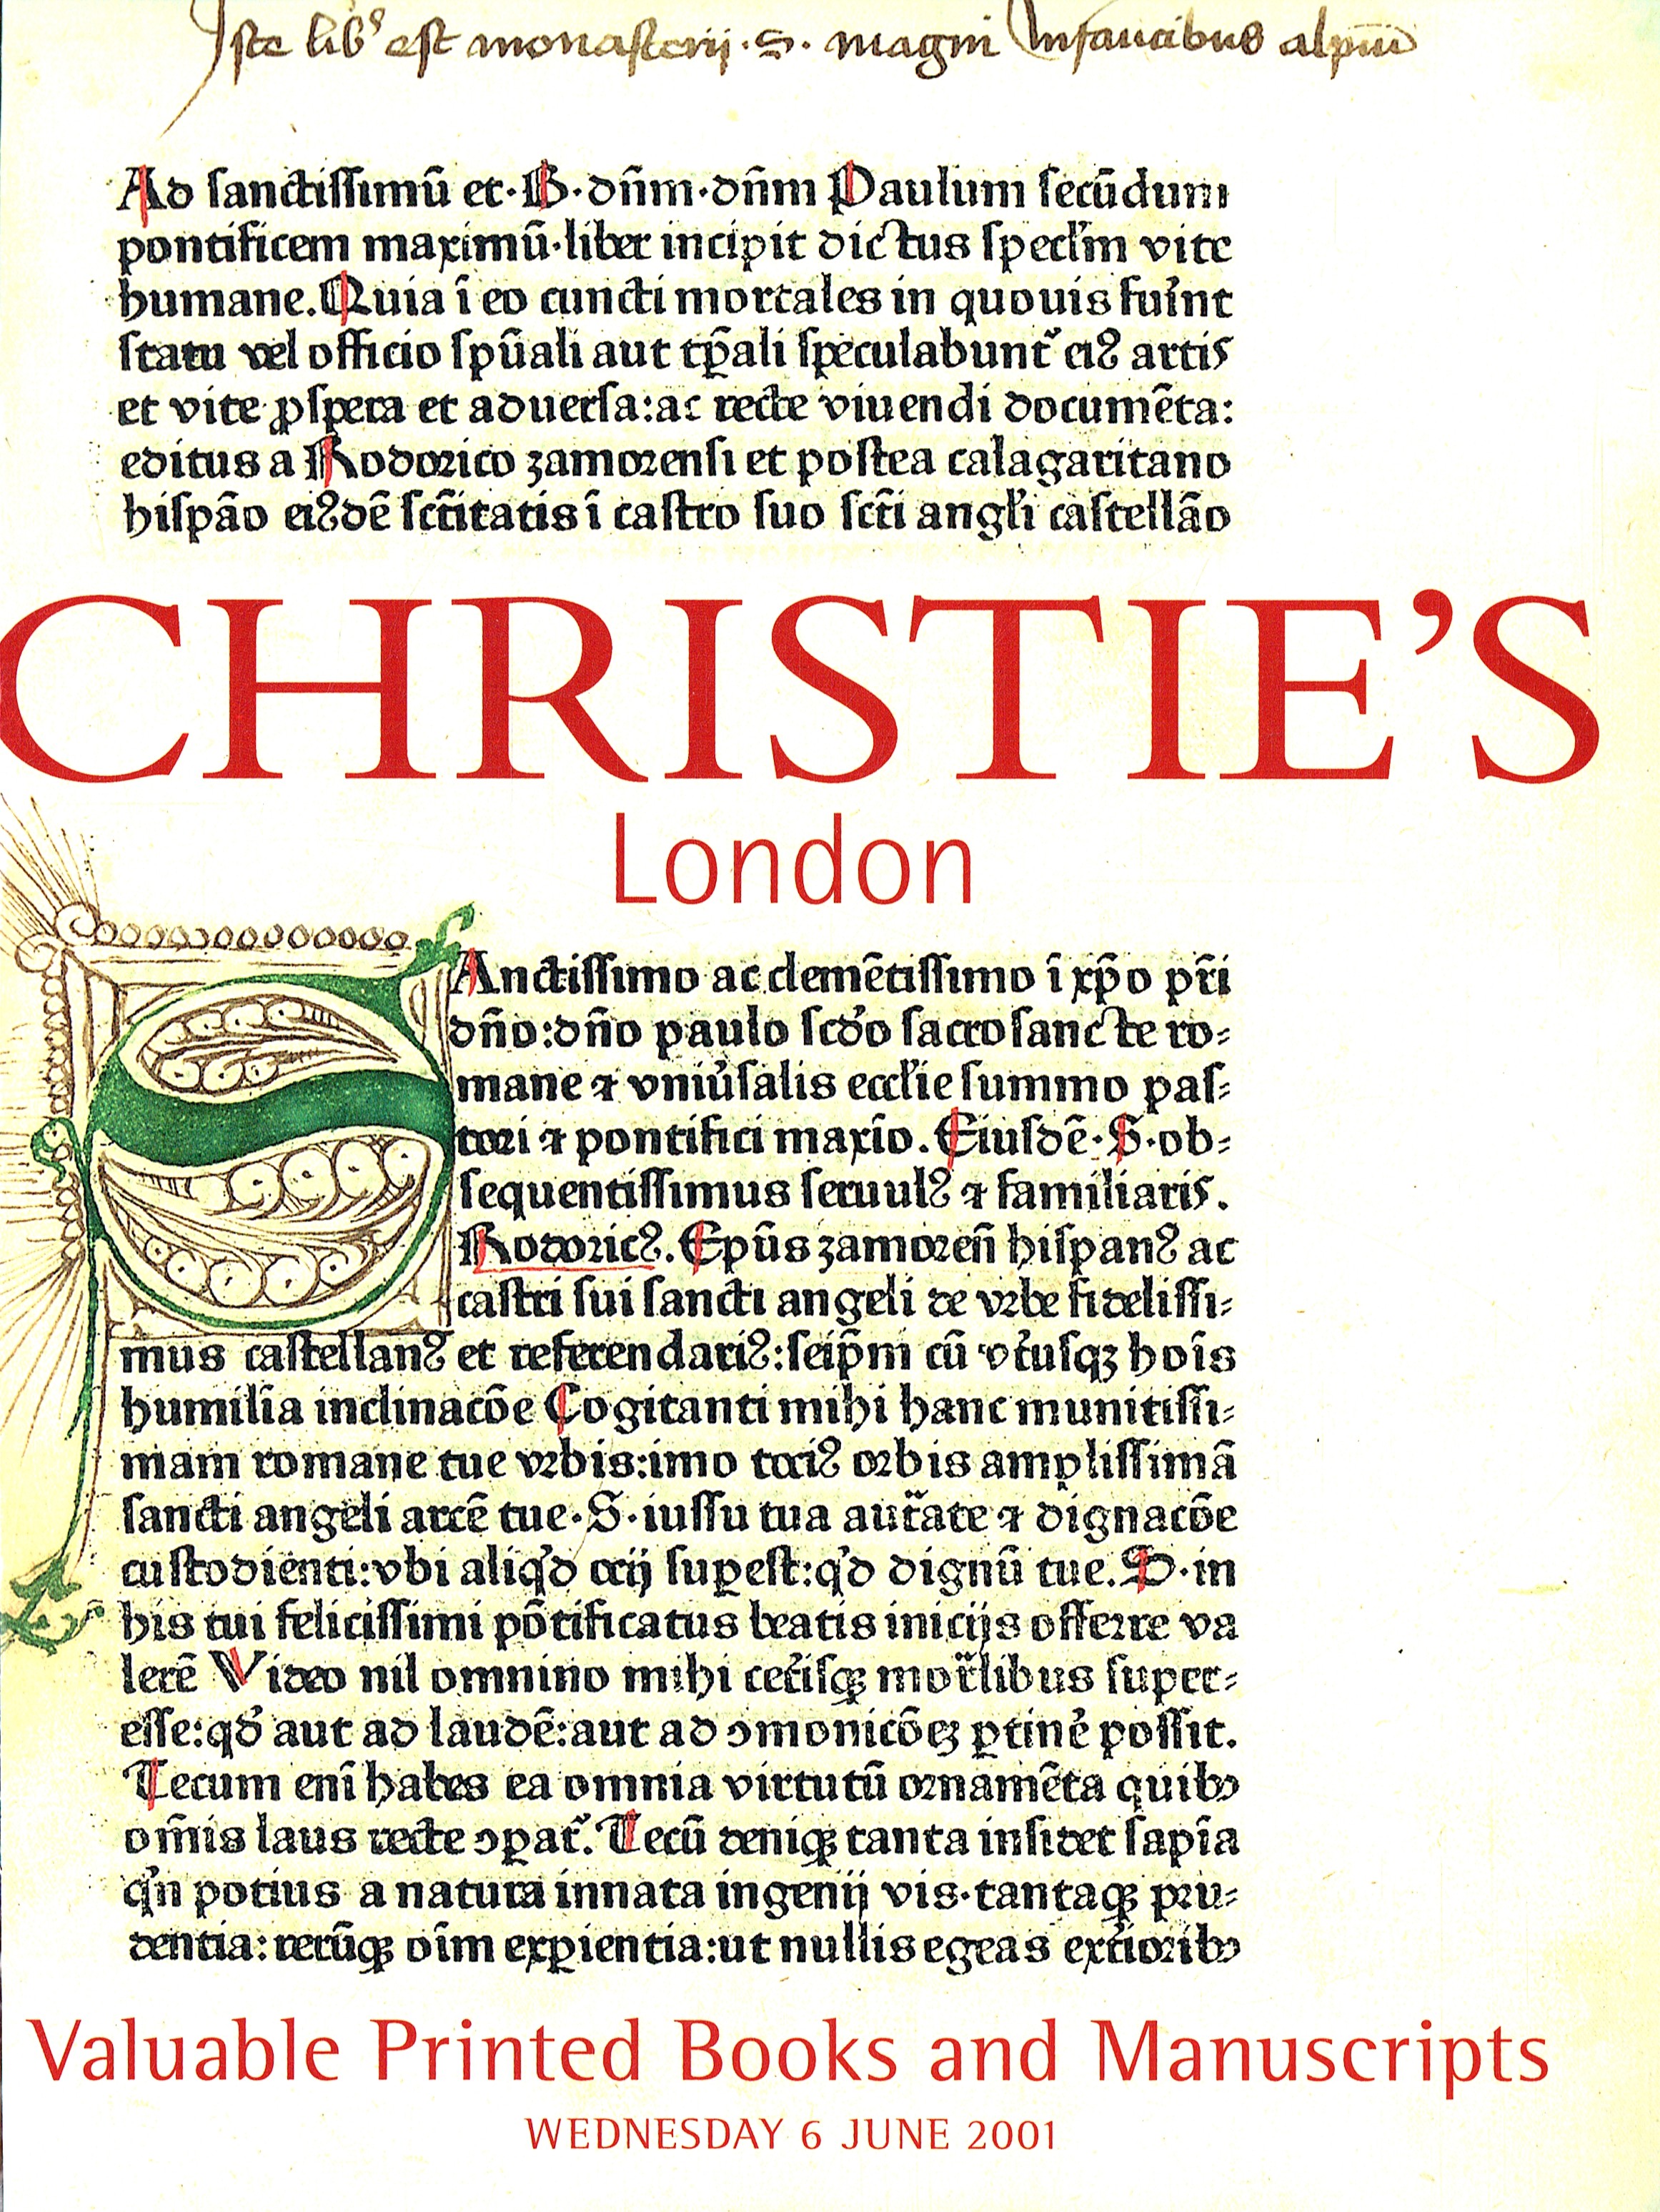 Christies June 2001 Valuable Printed Books & Manuscripts (Digital Only)